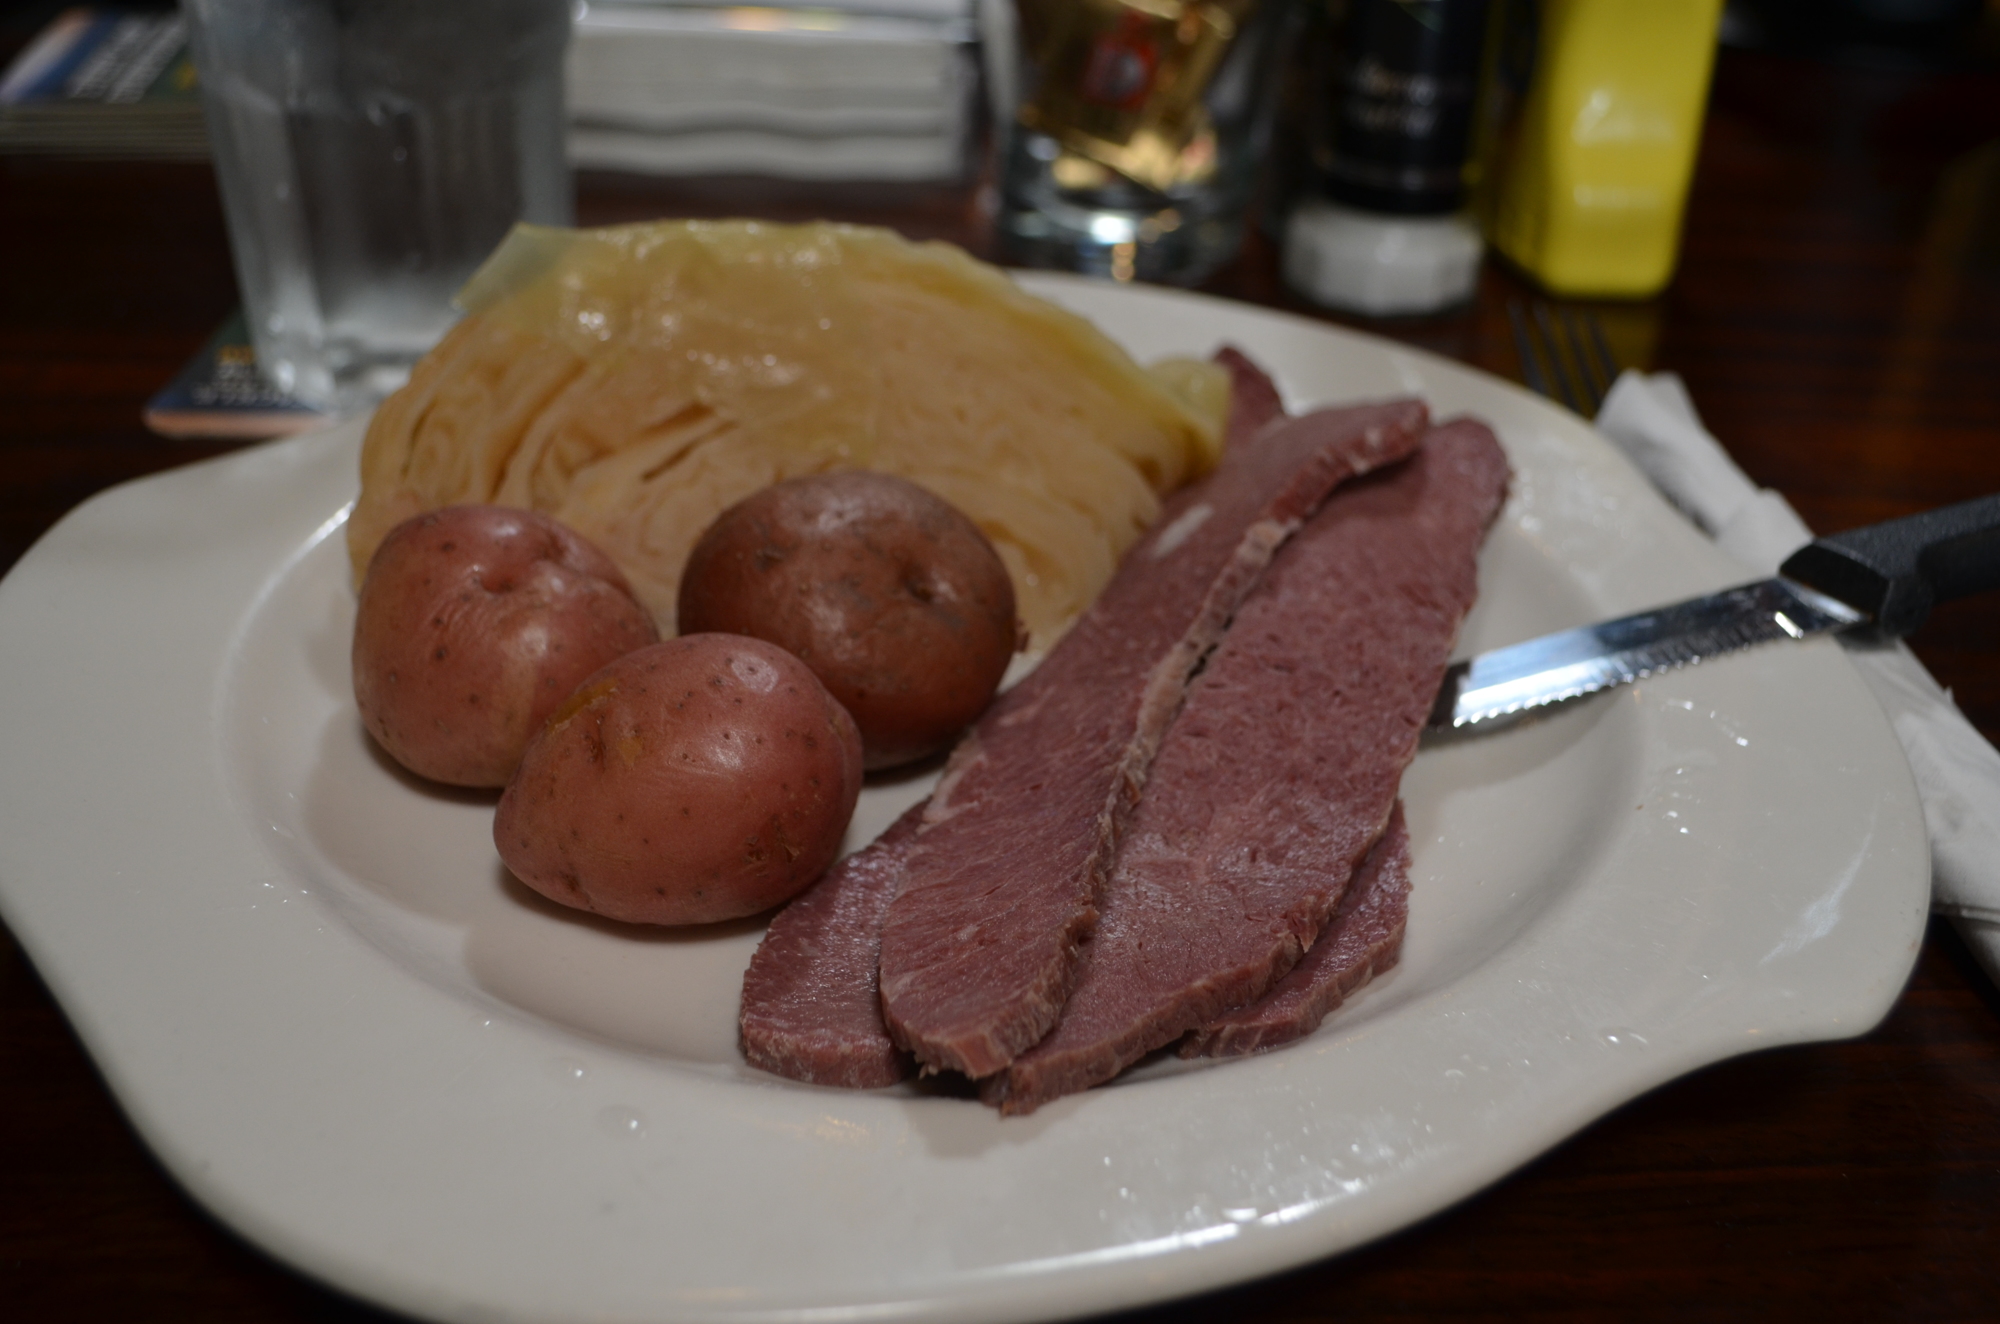 The corned beef and cabbage at Lynches is $17.